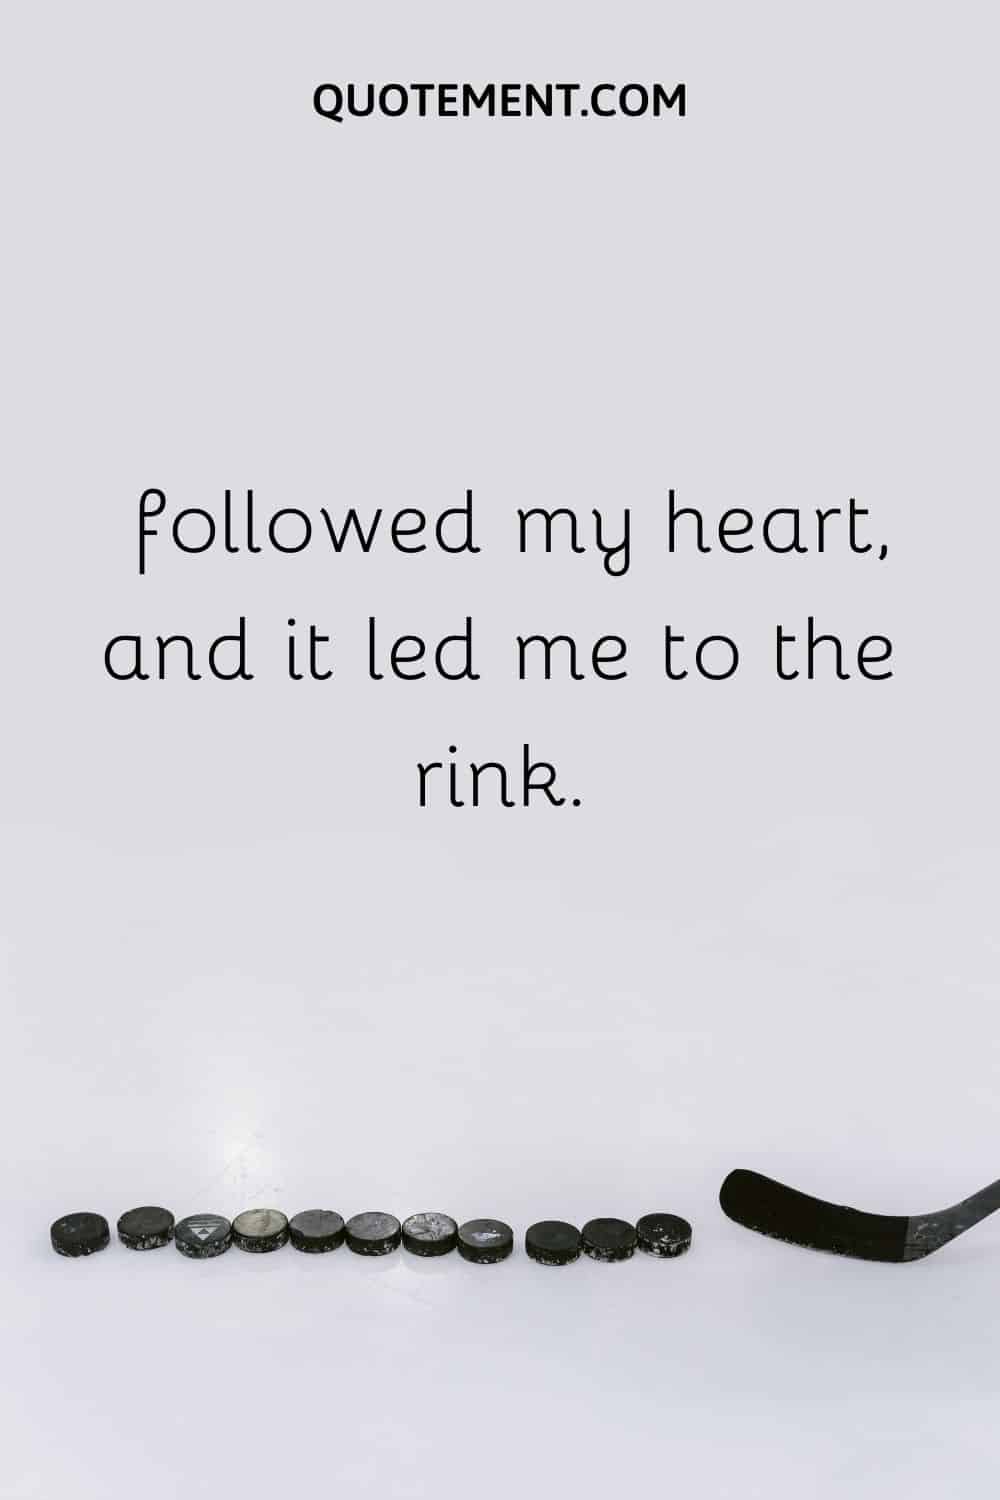 I followed my heart, and it led me to the rink.